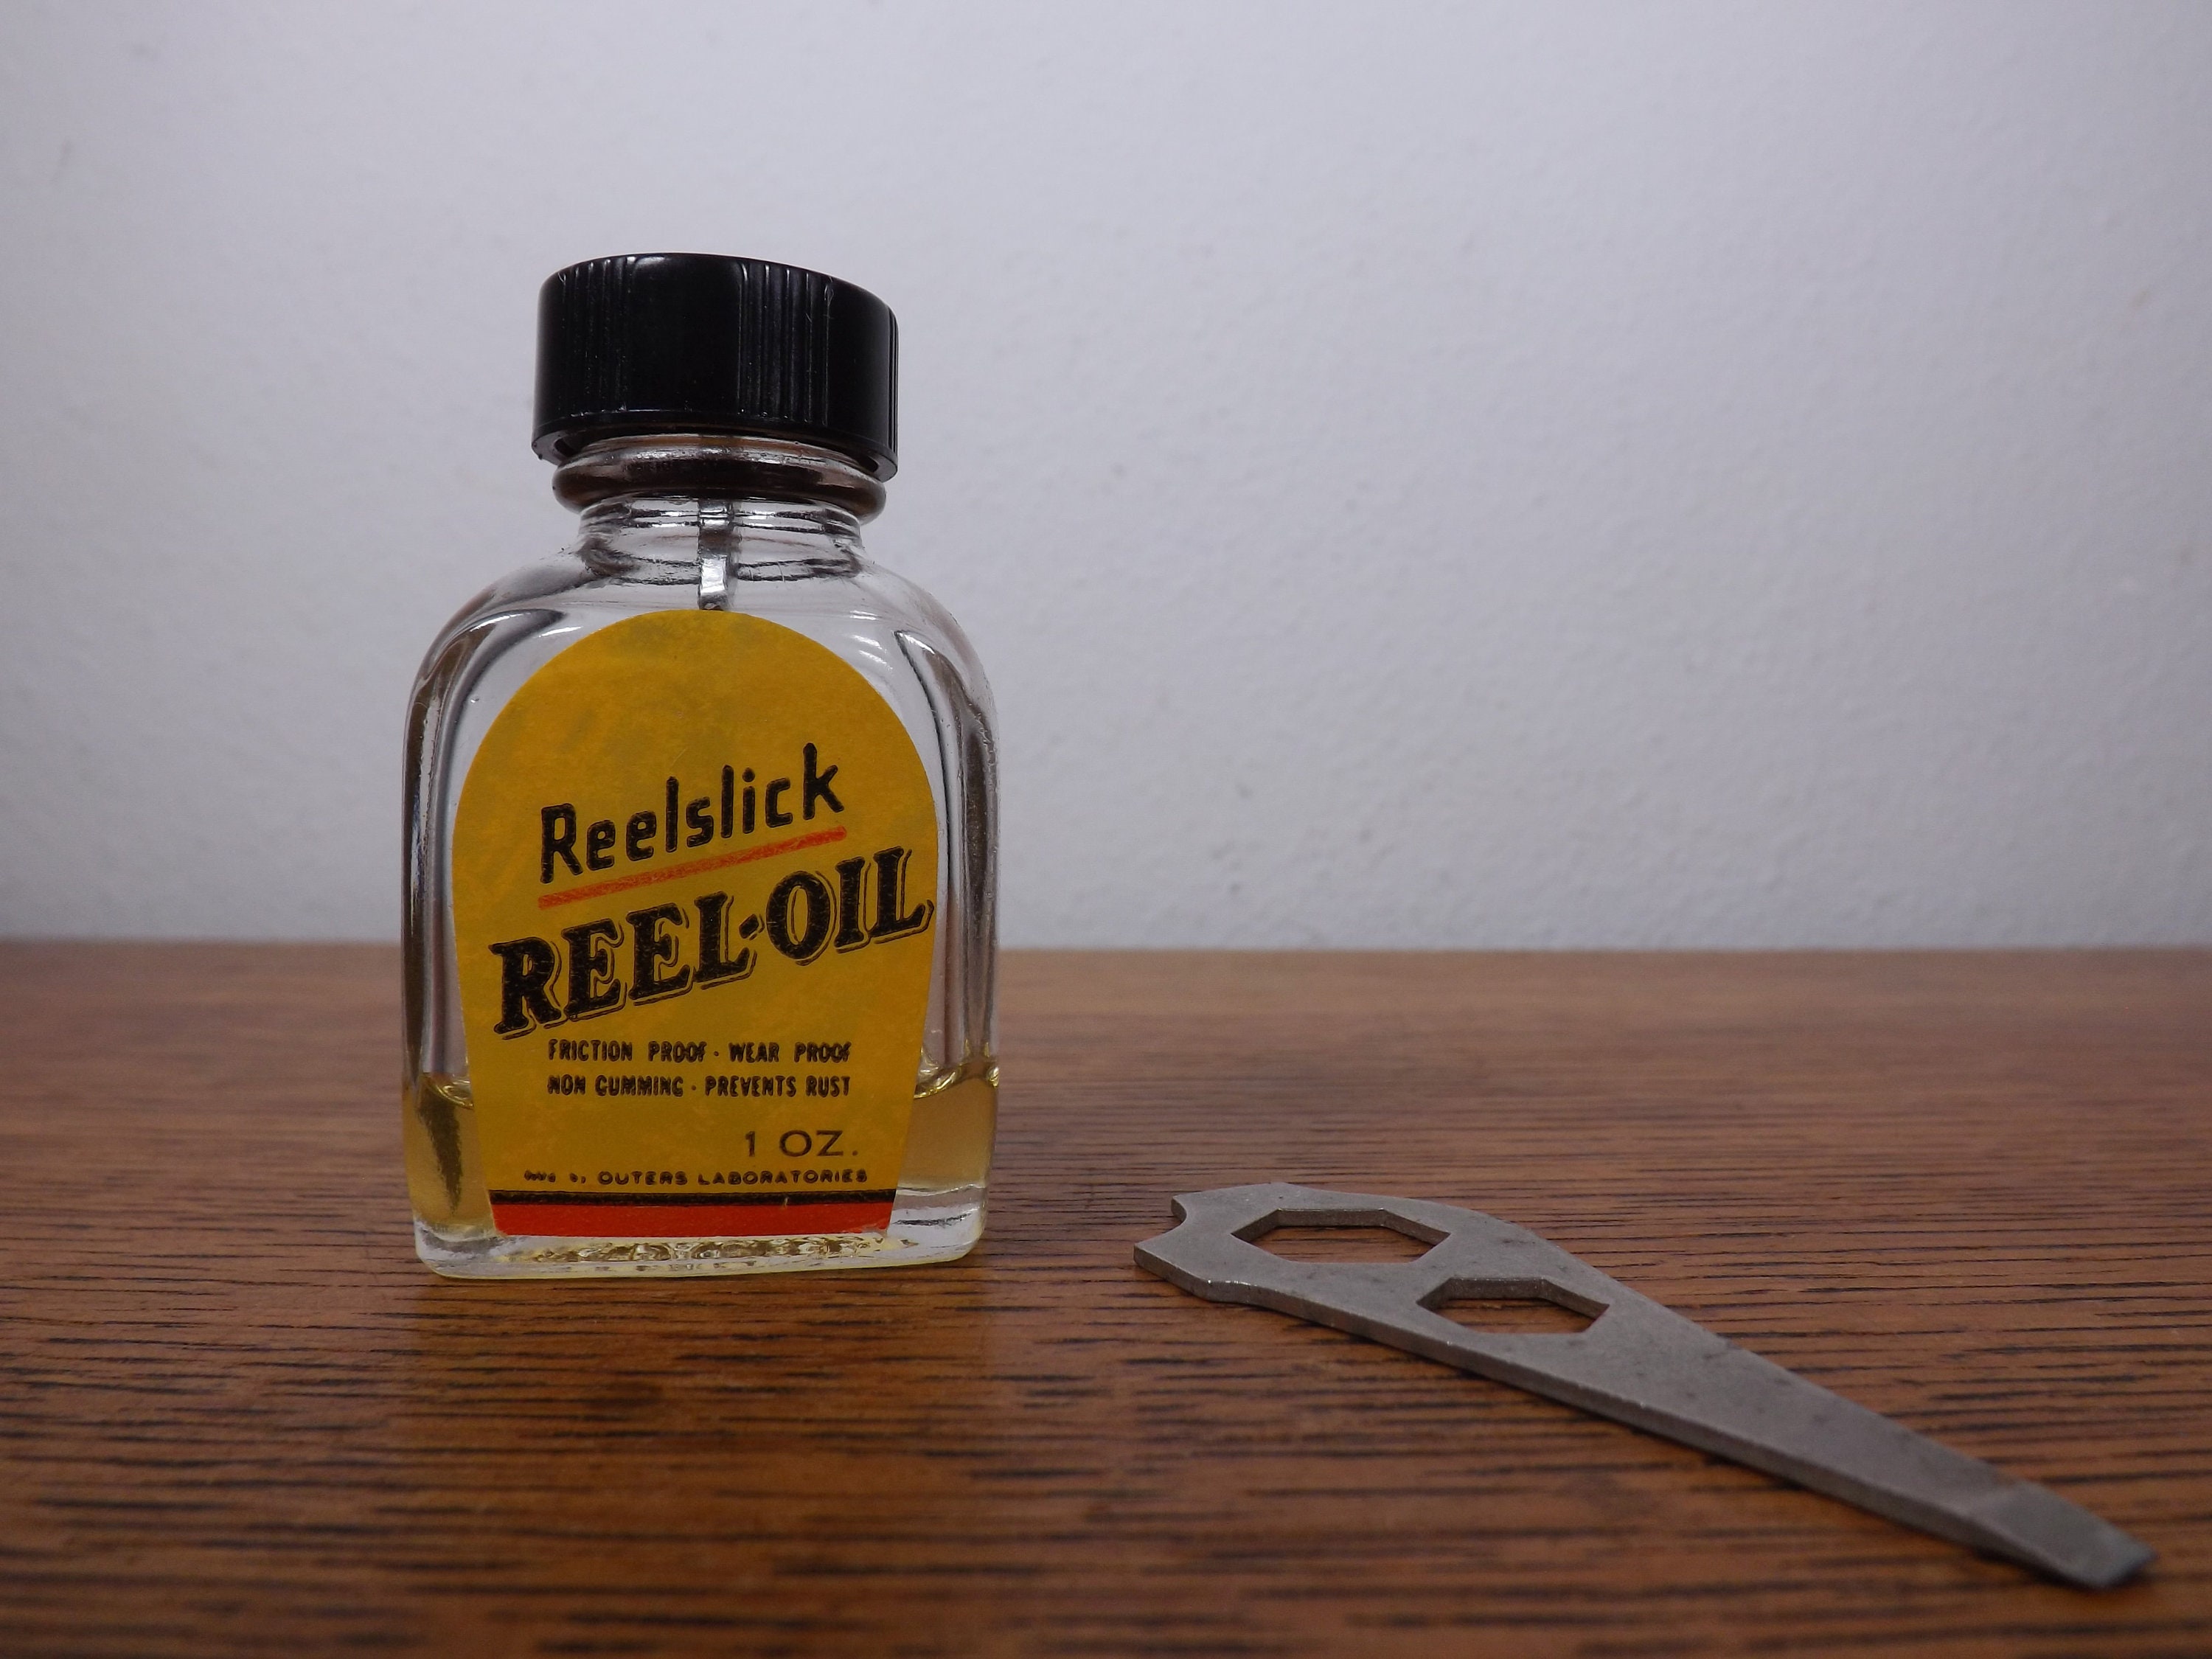 Reel-oil, Reelslick Vintage Bottle With Partial Contents and Nut